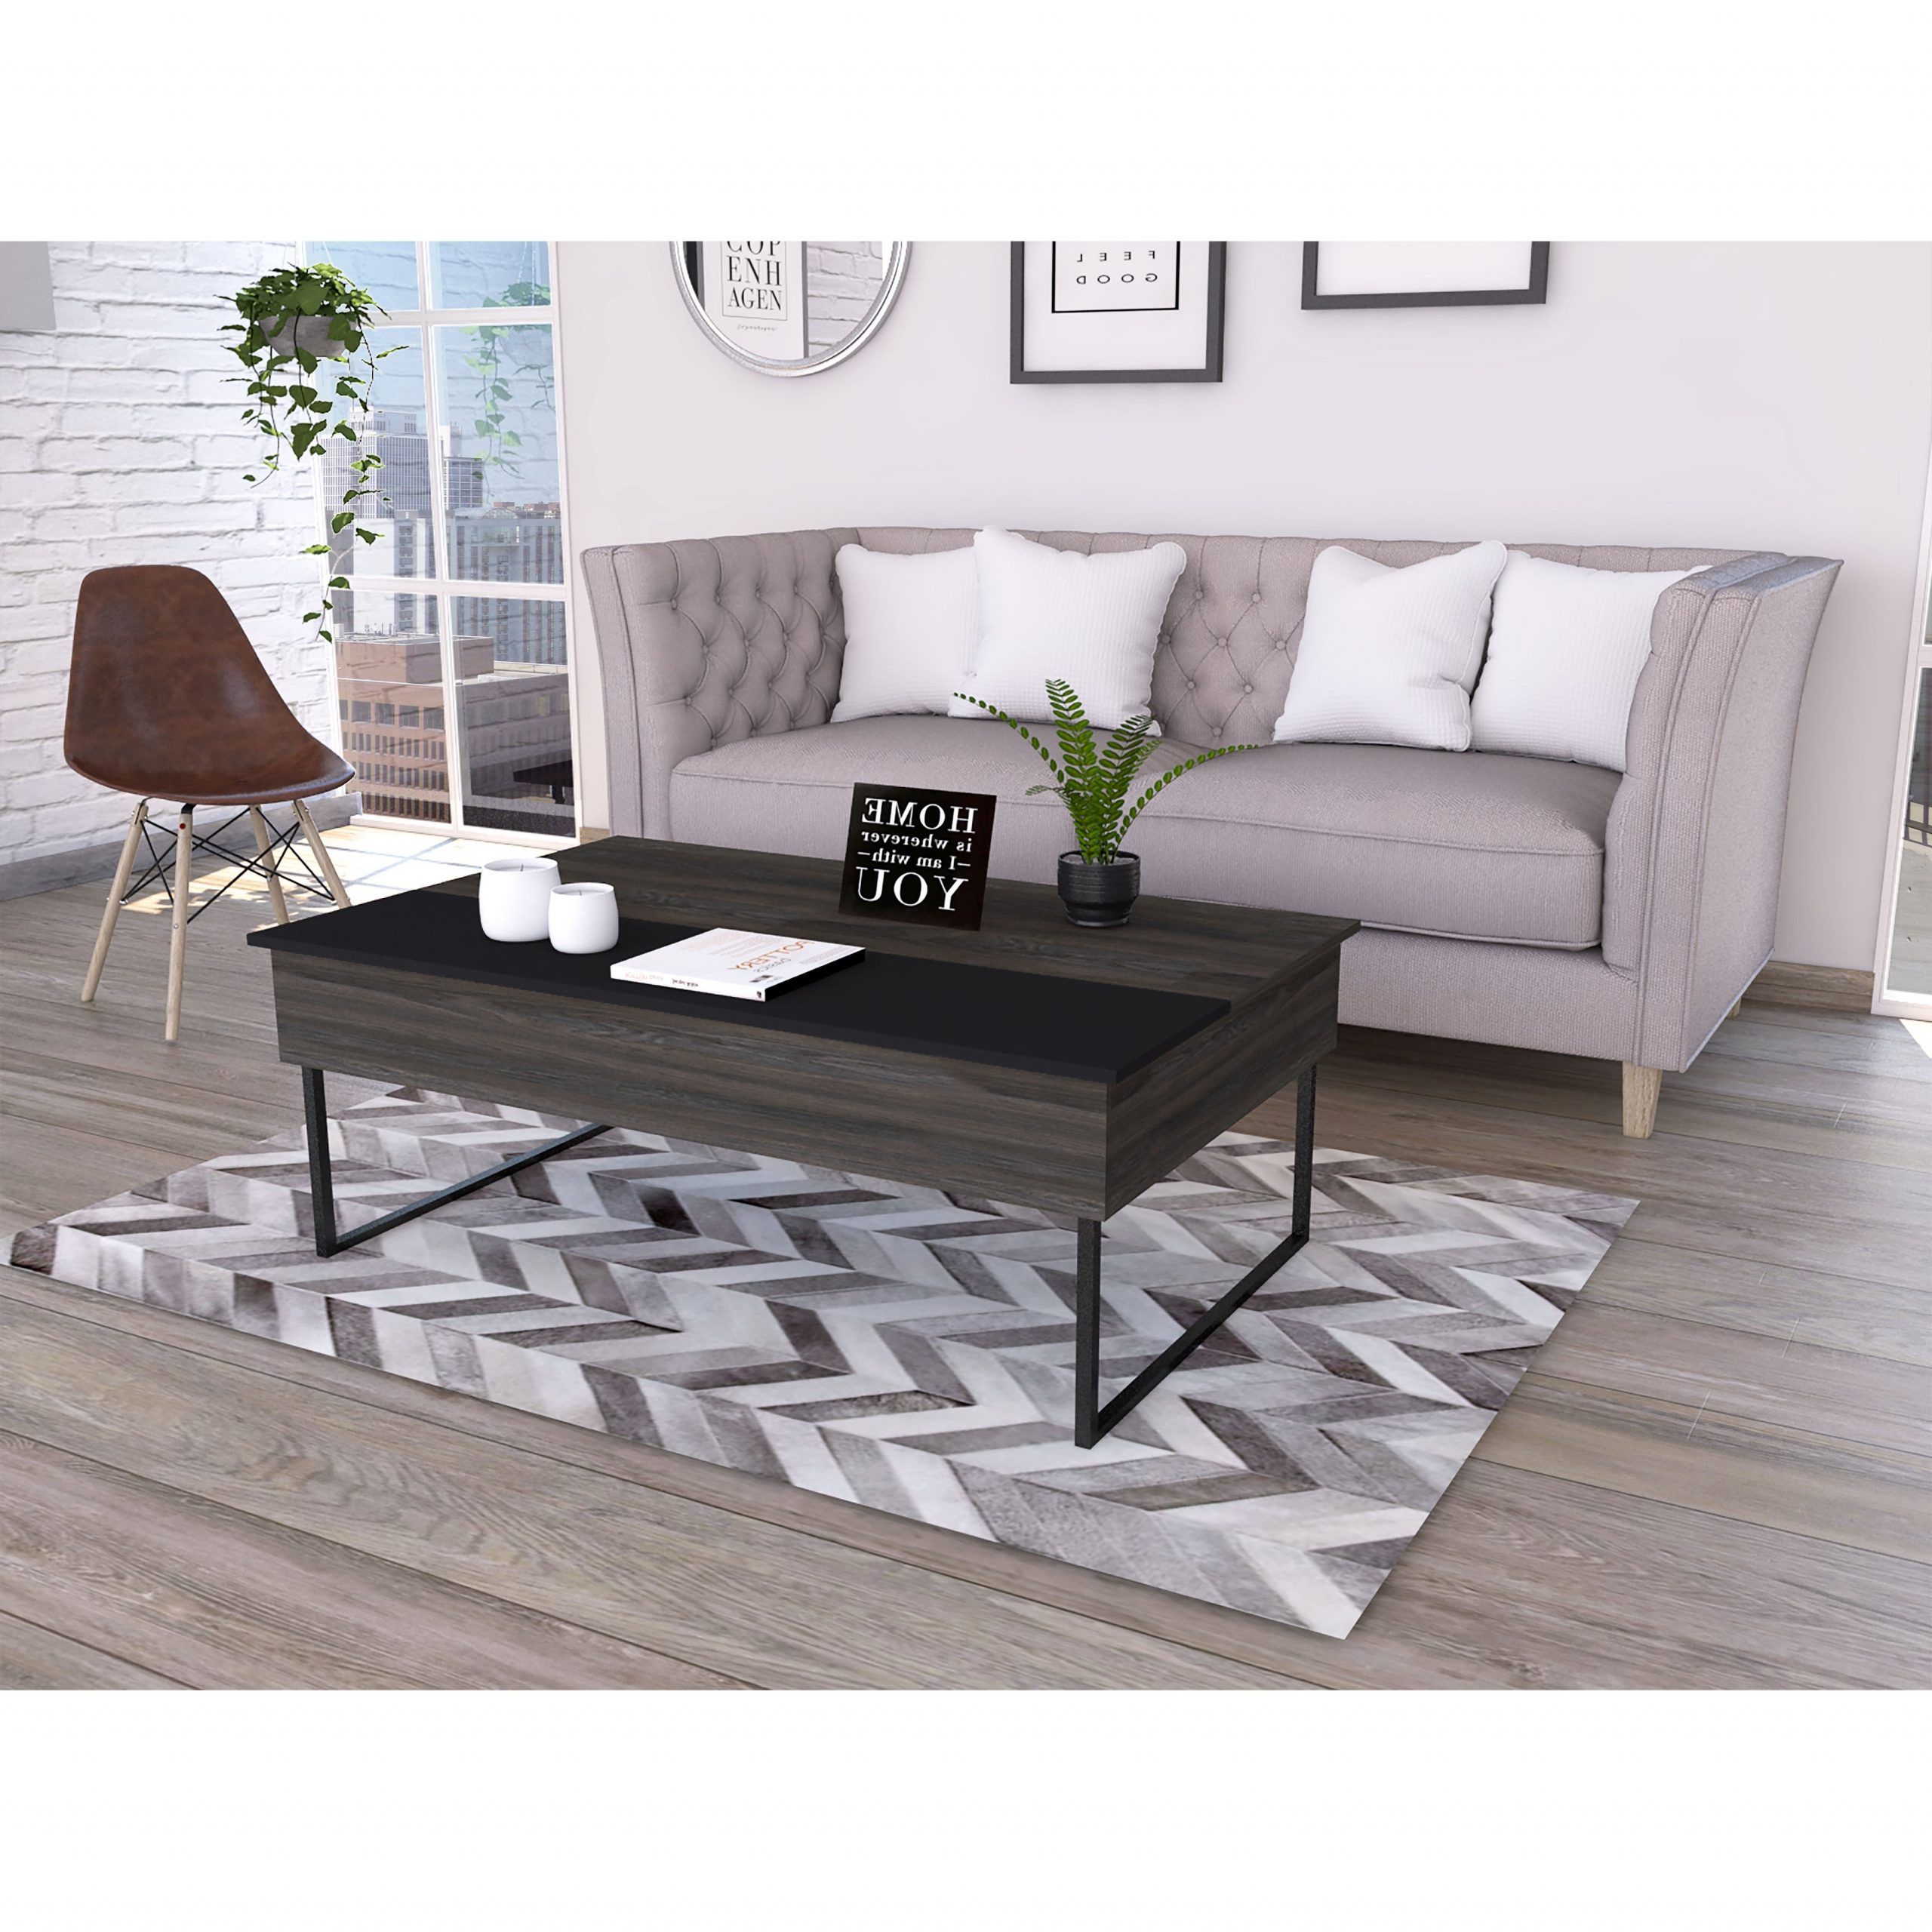 Tuhome Kaskade Lift Top Coffee Table Espresso – On Sale – Overstock –  34134384 Throughout Well Known Oak Espresso Coffee Tables (View 17 of 20)